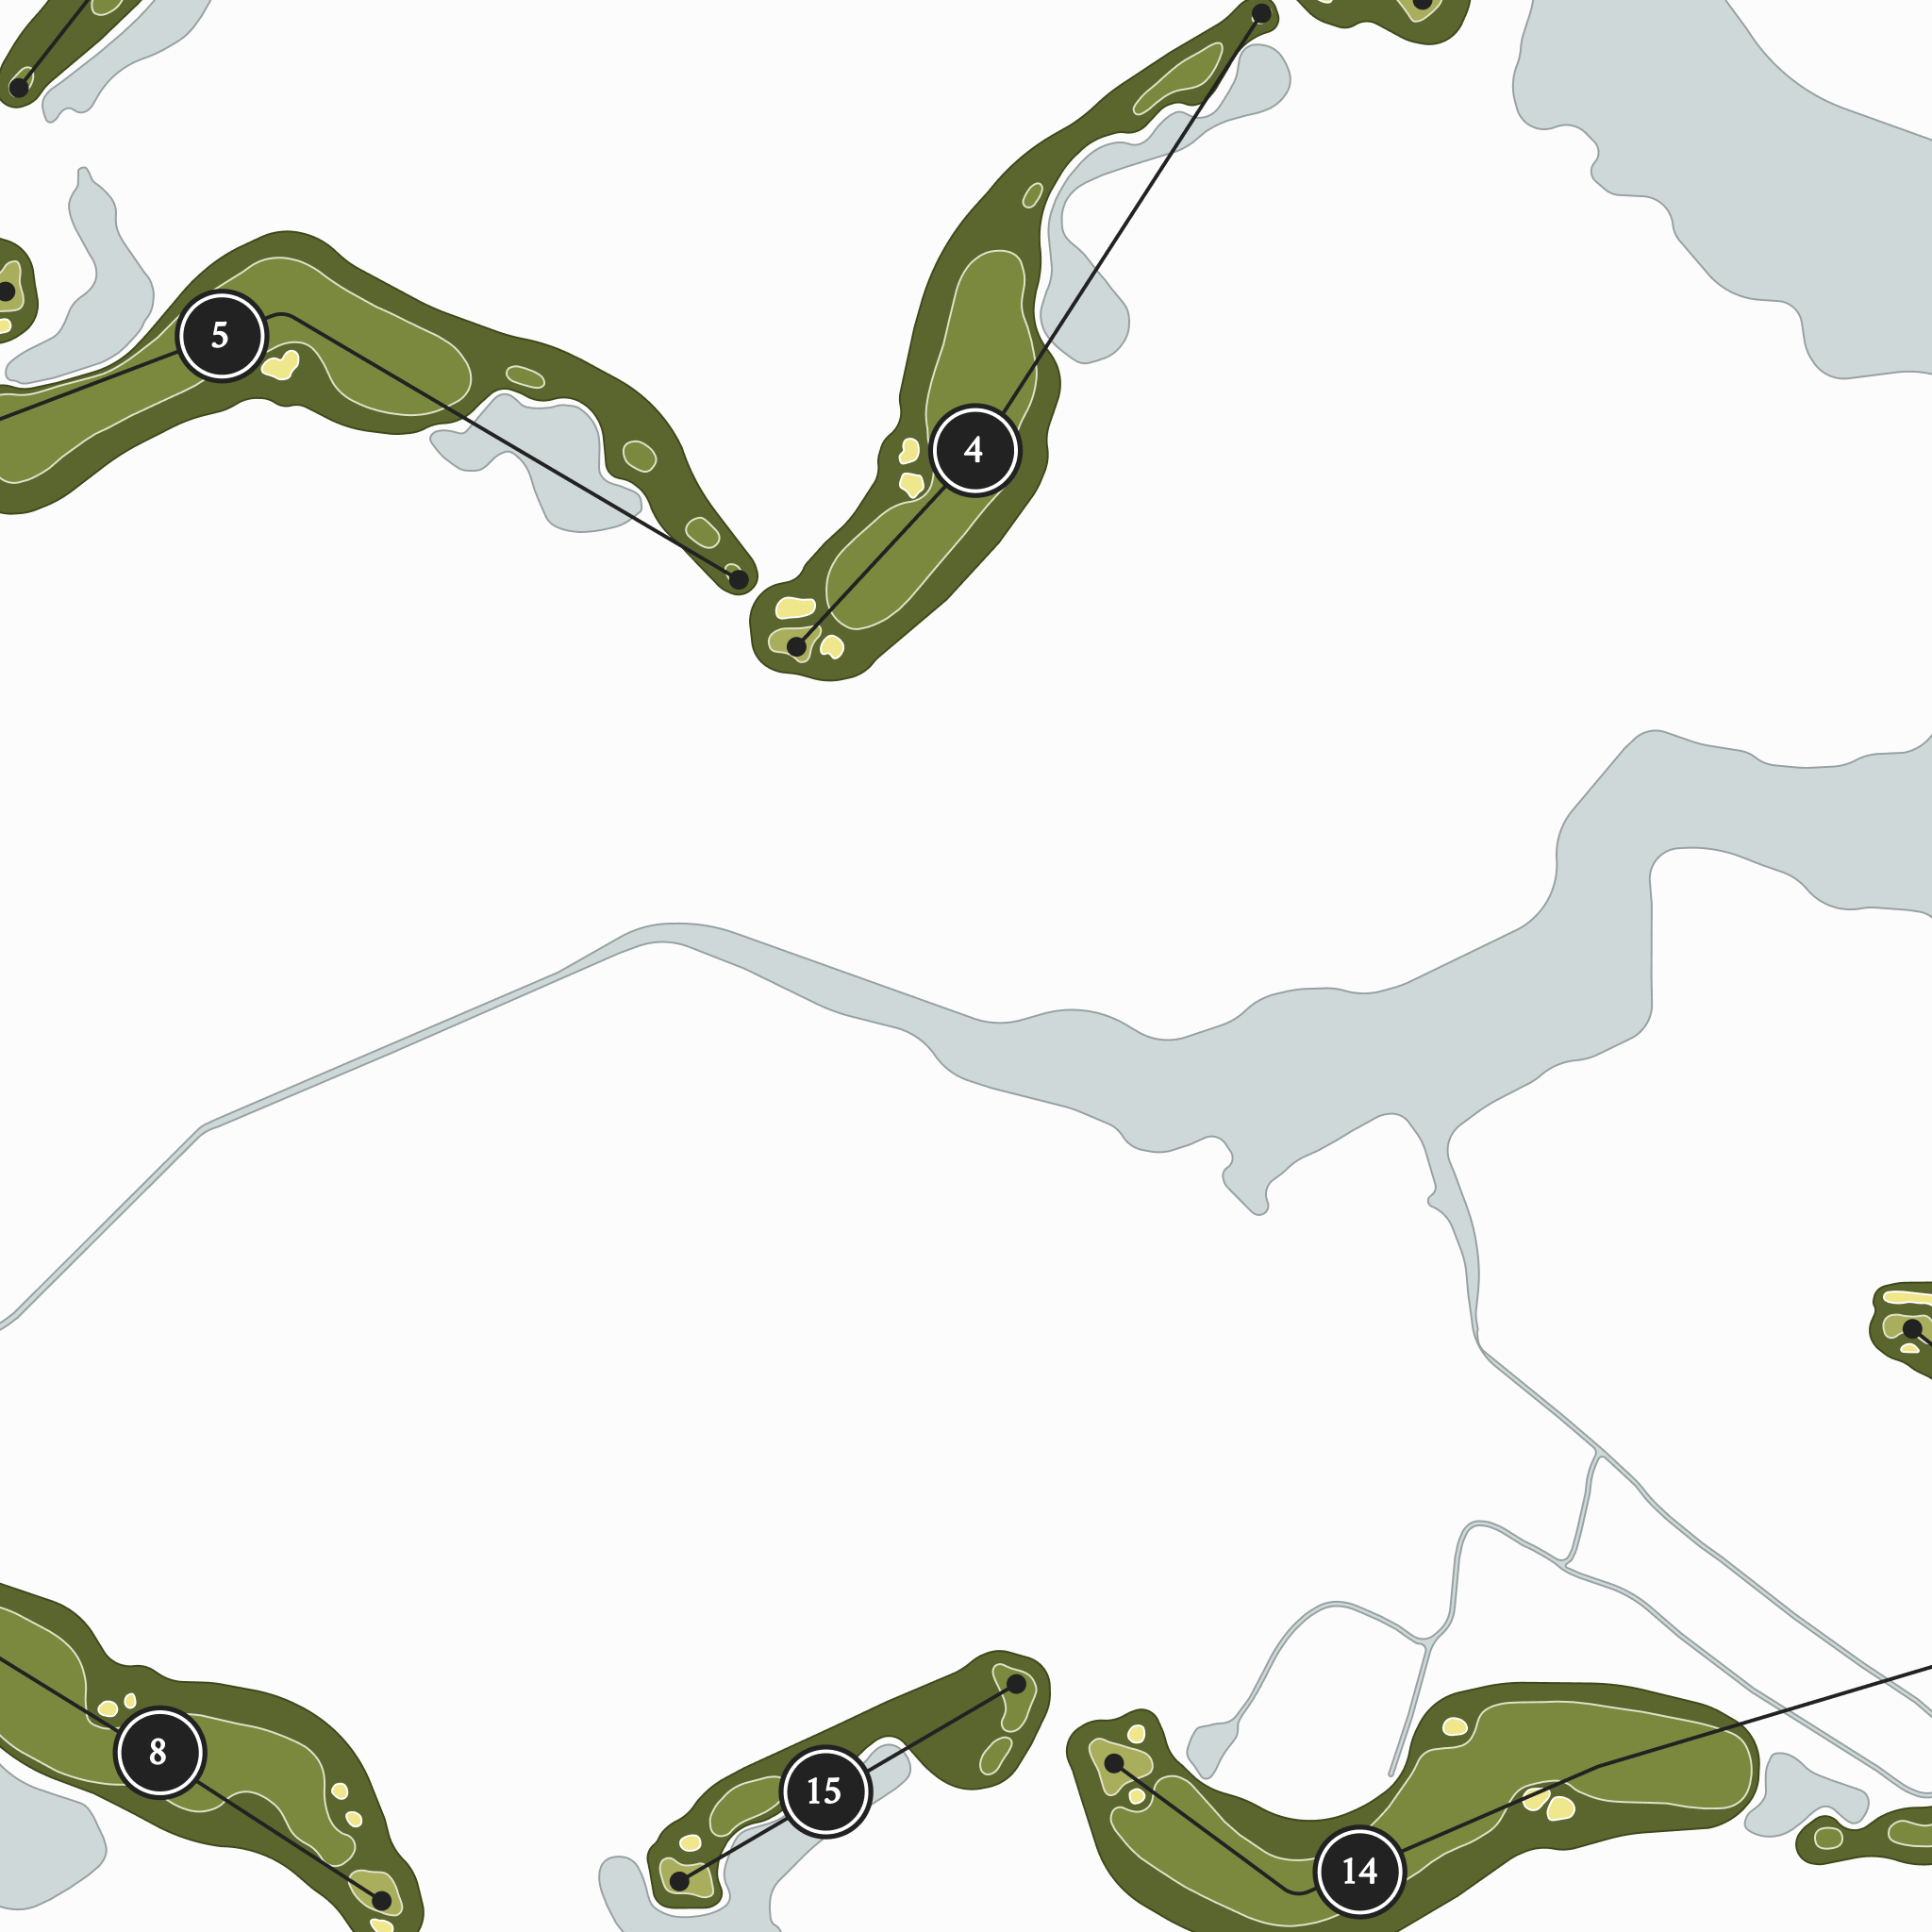 Bayside Resort Golf Club| Golf Course Print | Close Up With Hole Numbers #hole numbers_yes